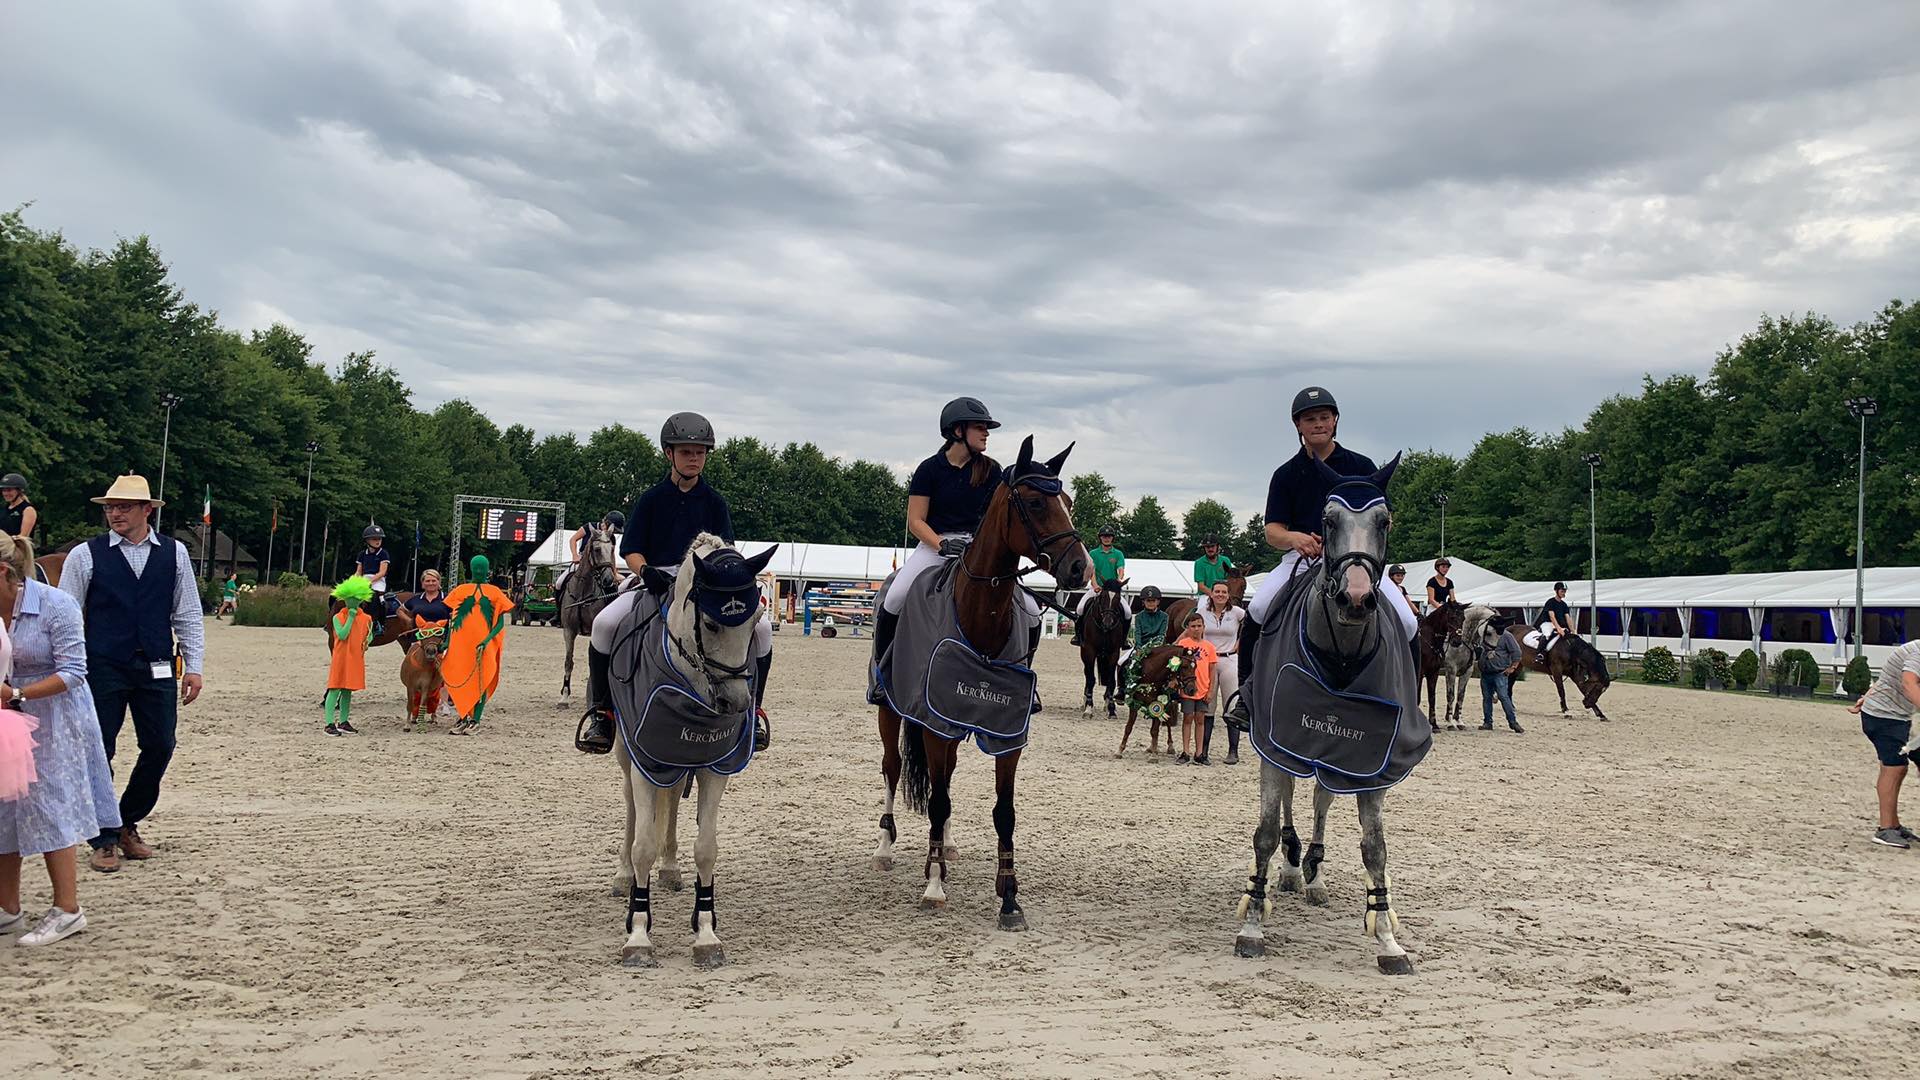 Stal 't Grouwenhof wint Battle of the clubs tijdens Flanders Horse Event